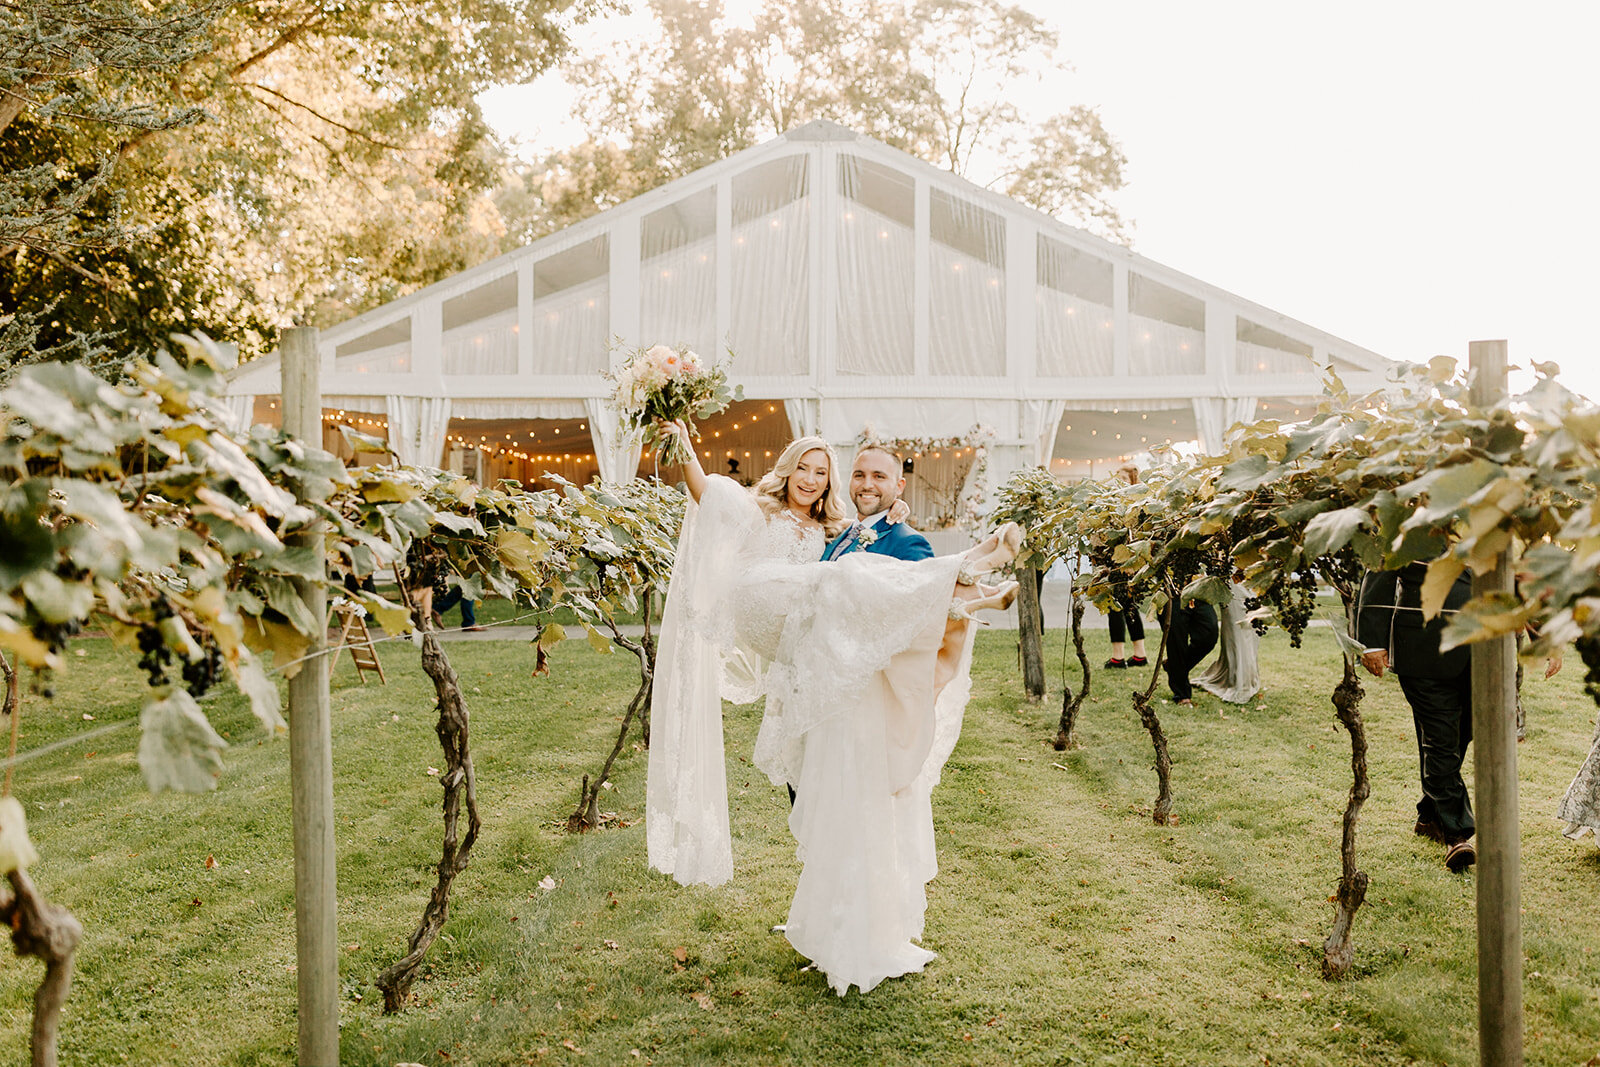 A Whimsical Romance Bucks County Wedding at Crossing Vineyards in New Hope, PA. Photographed by Karra Leigh Photography